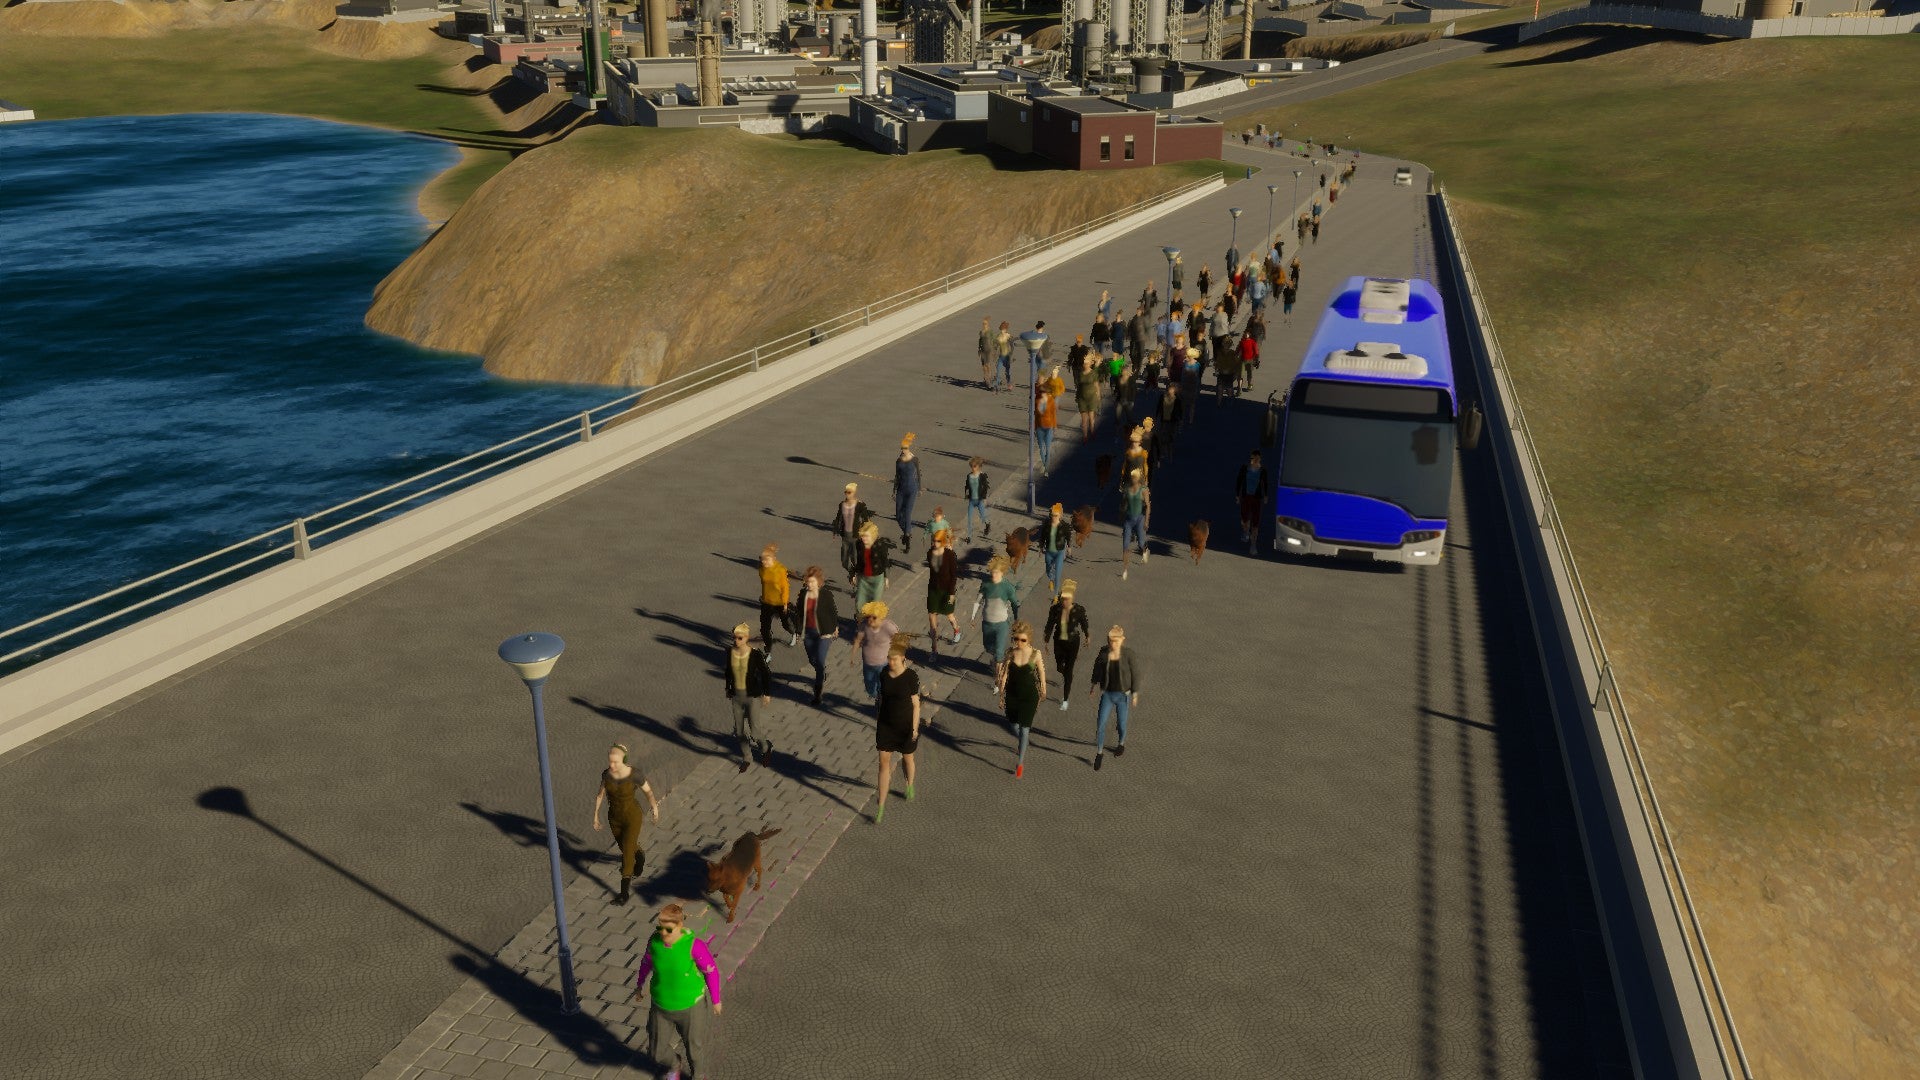 Cities Skylines PC Review: Laying a New Foundation | VG247